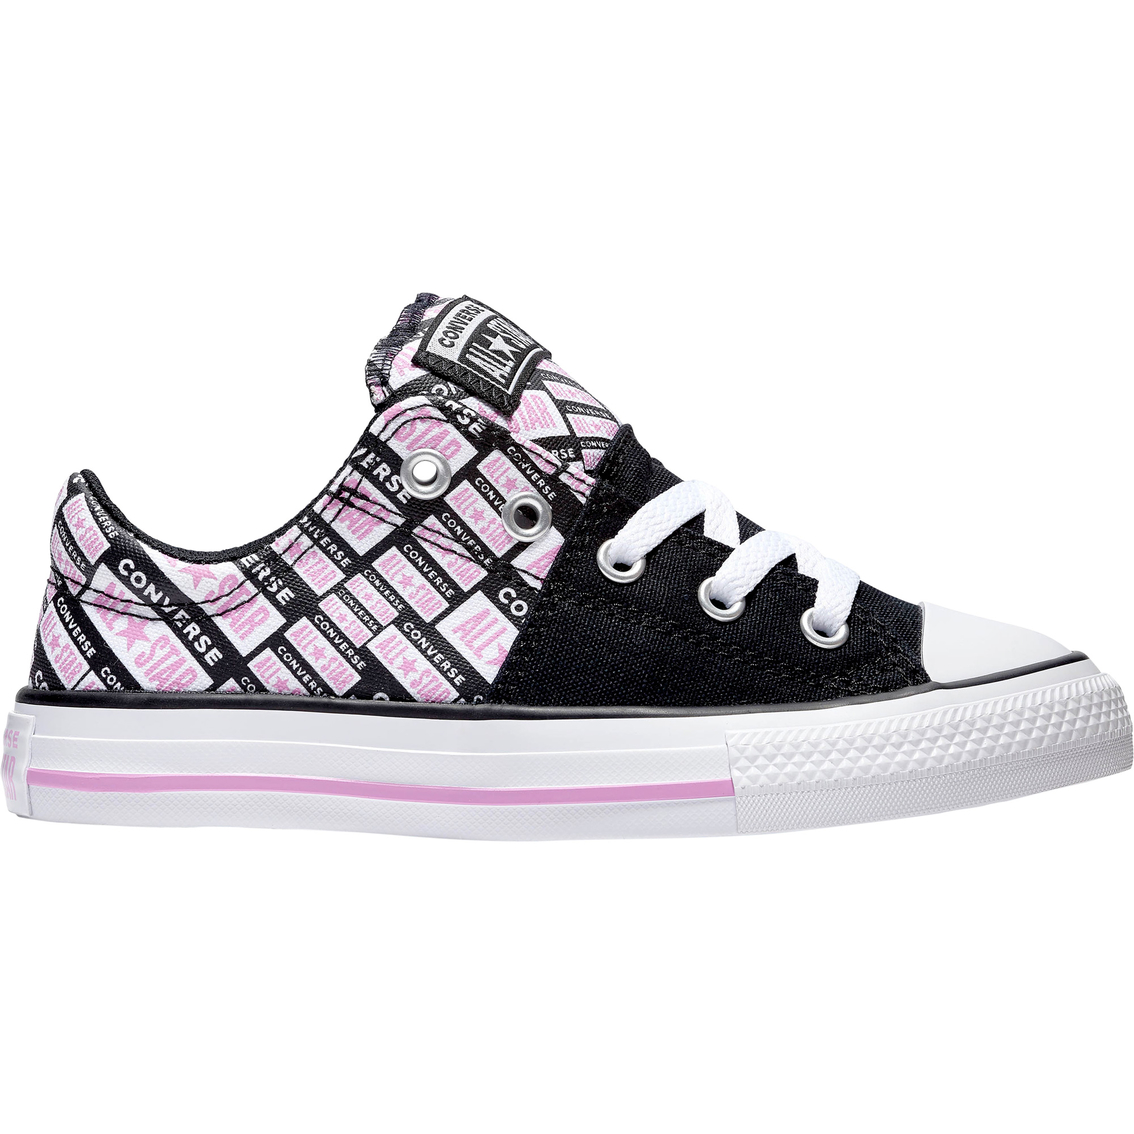 converse madison low top